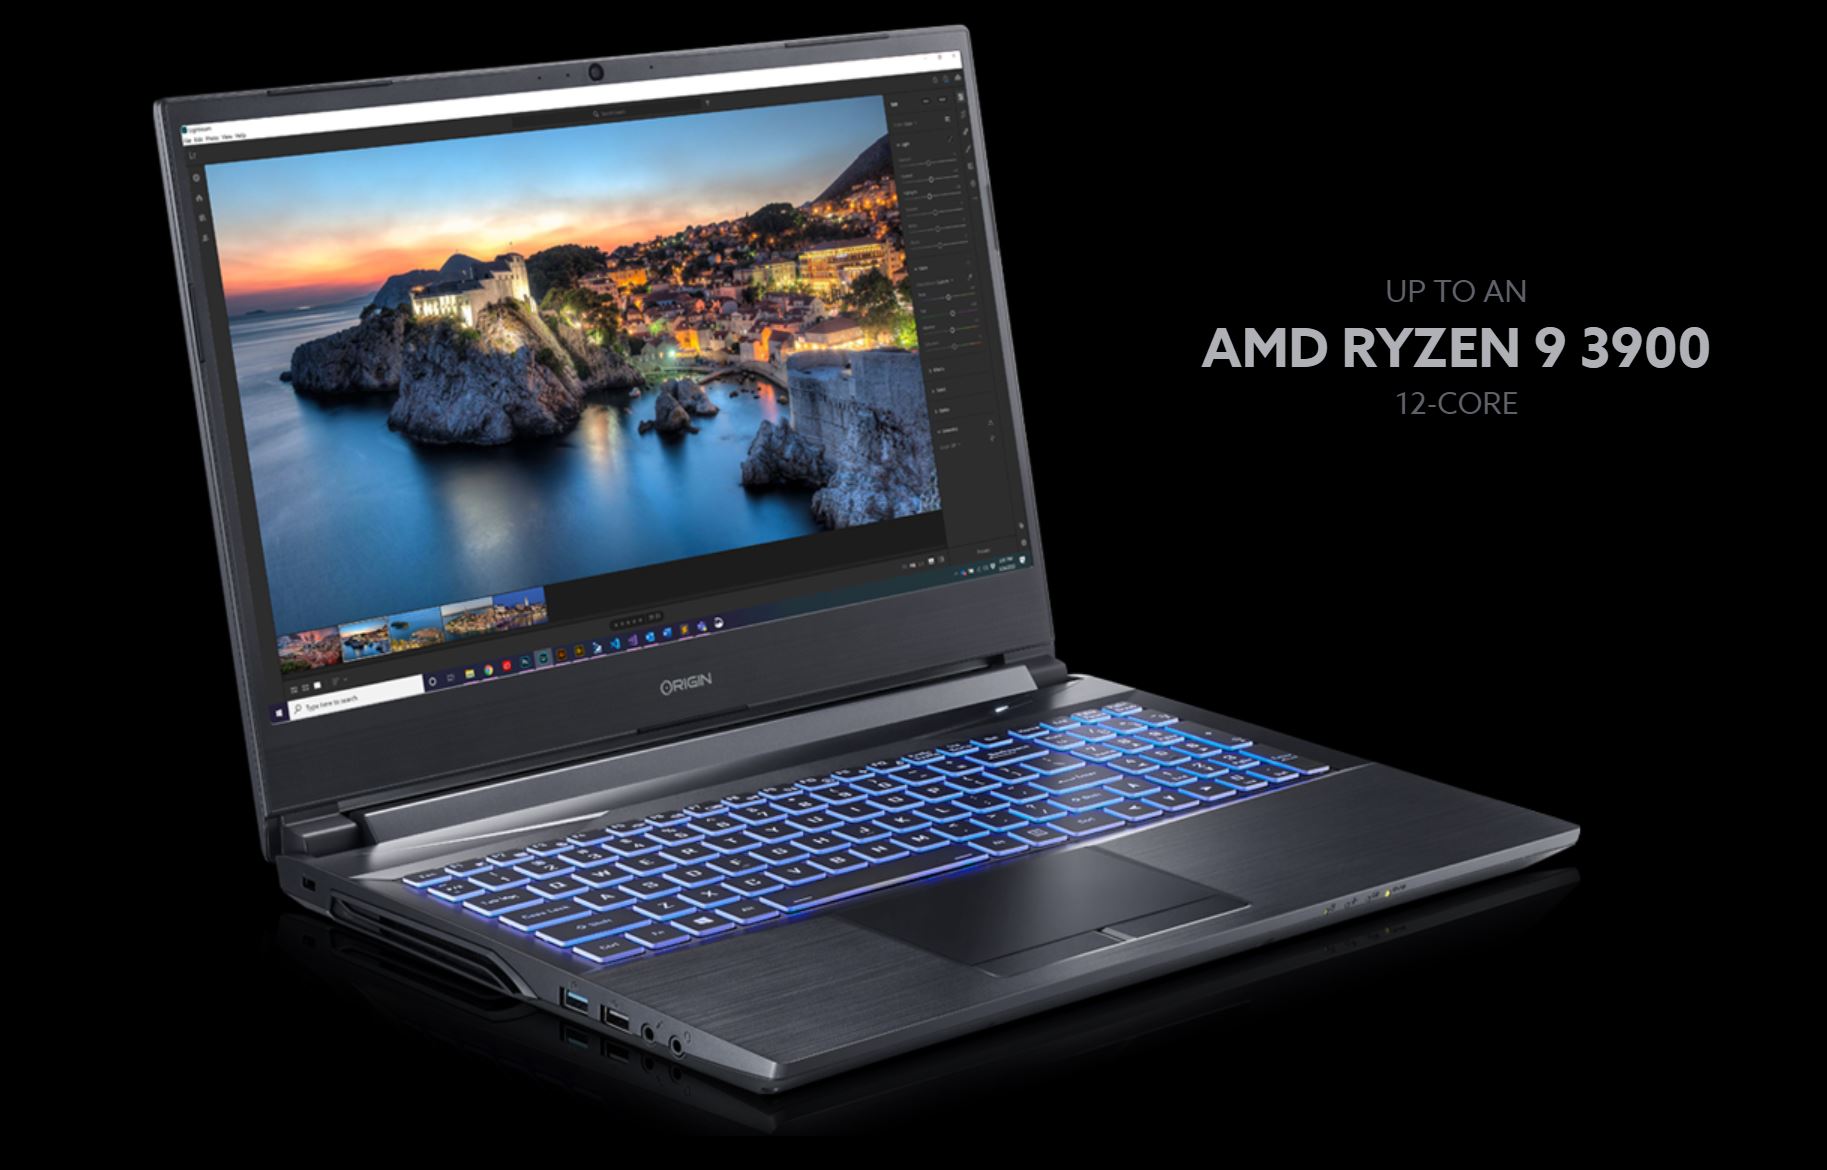 ORIGIN PC announces gaming laptop with up to 9 3900 and GeForce RTX 2070 - VideoCardz.com